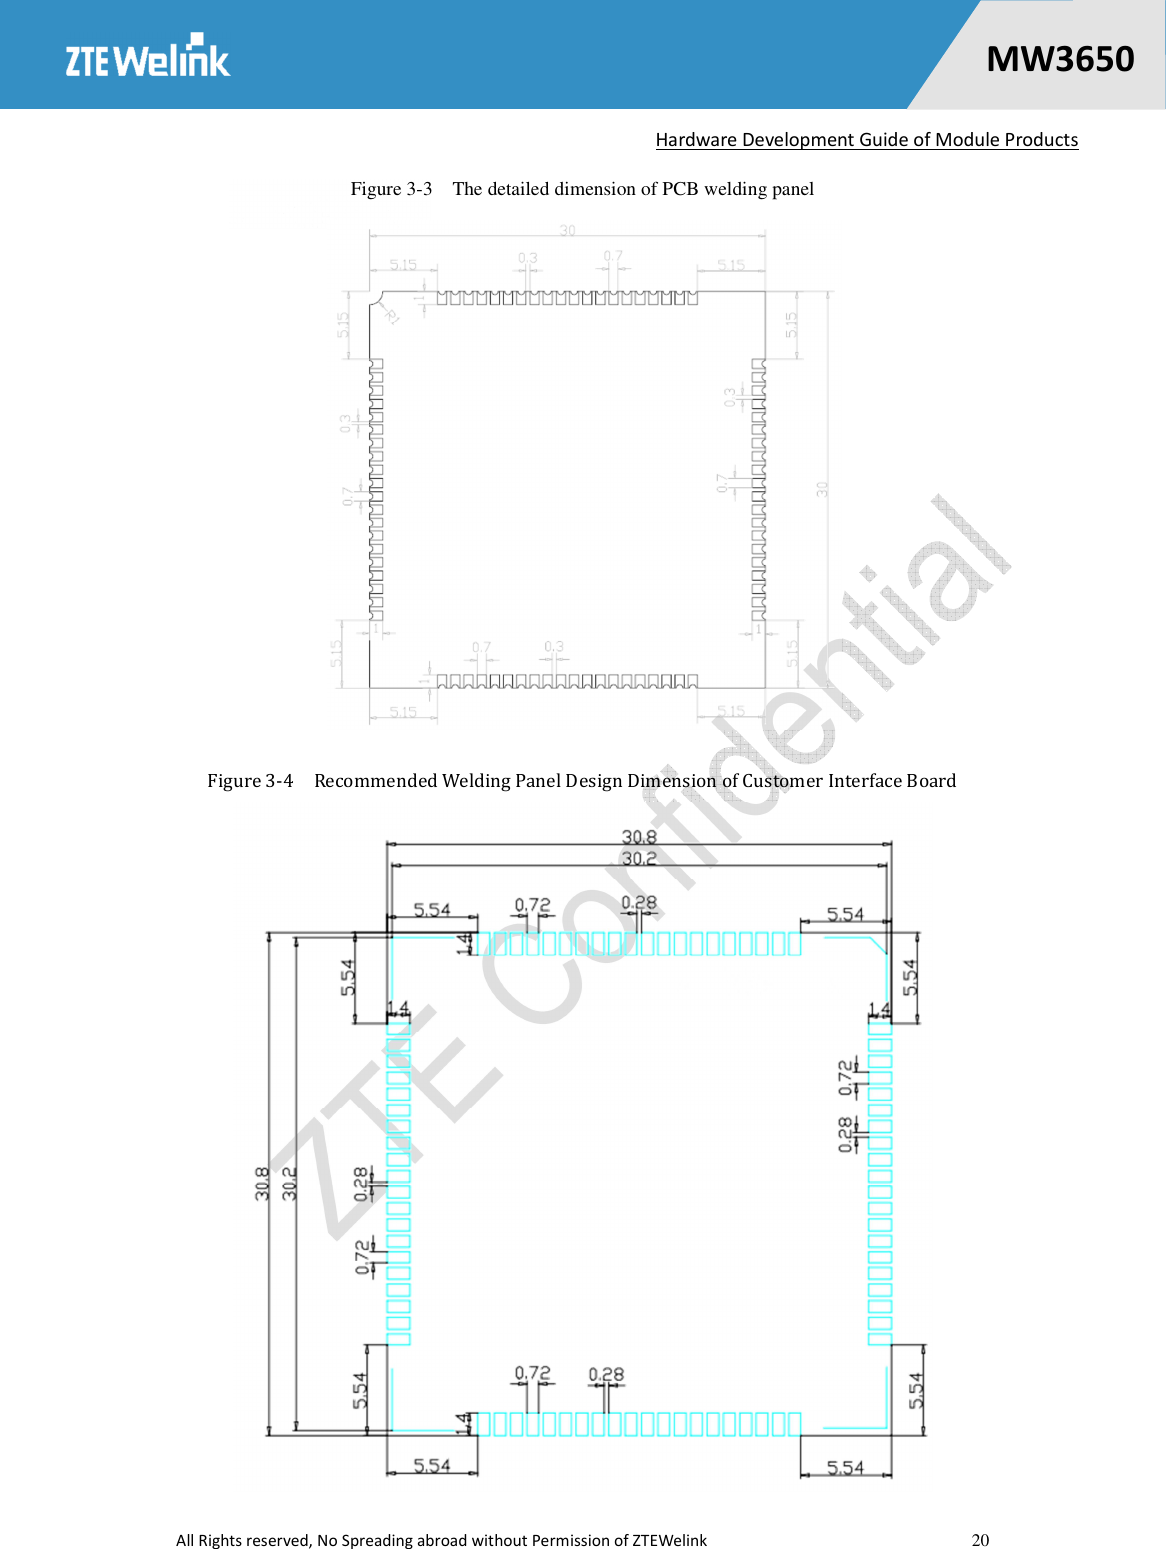   Hardware Development Guide of Module Products  All Rights reserved, No Spreading abroad without Permission of ZTEWelink    20    MW36500 Figure 3-3    The detailed dimension of PCB welding panel   Figure 3-4    Recommended Welding Panel Design Dimension of Customer Interface Board  